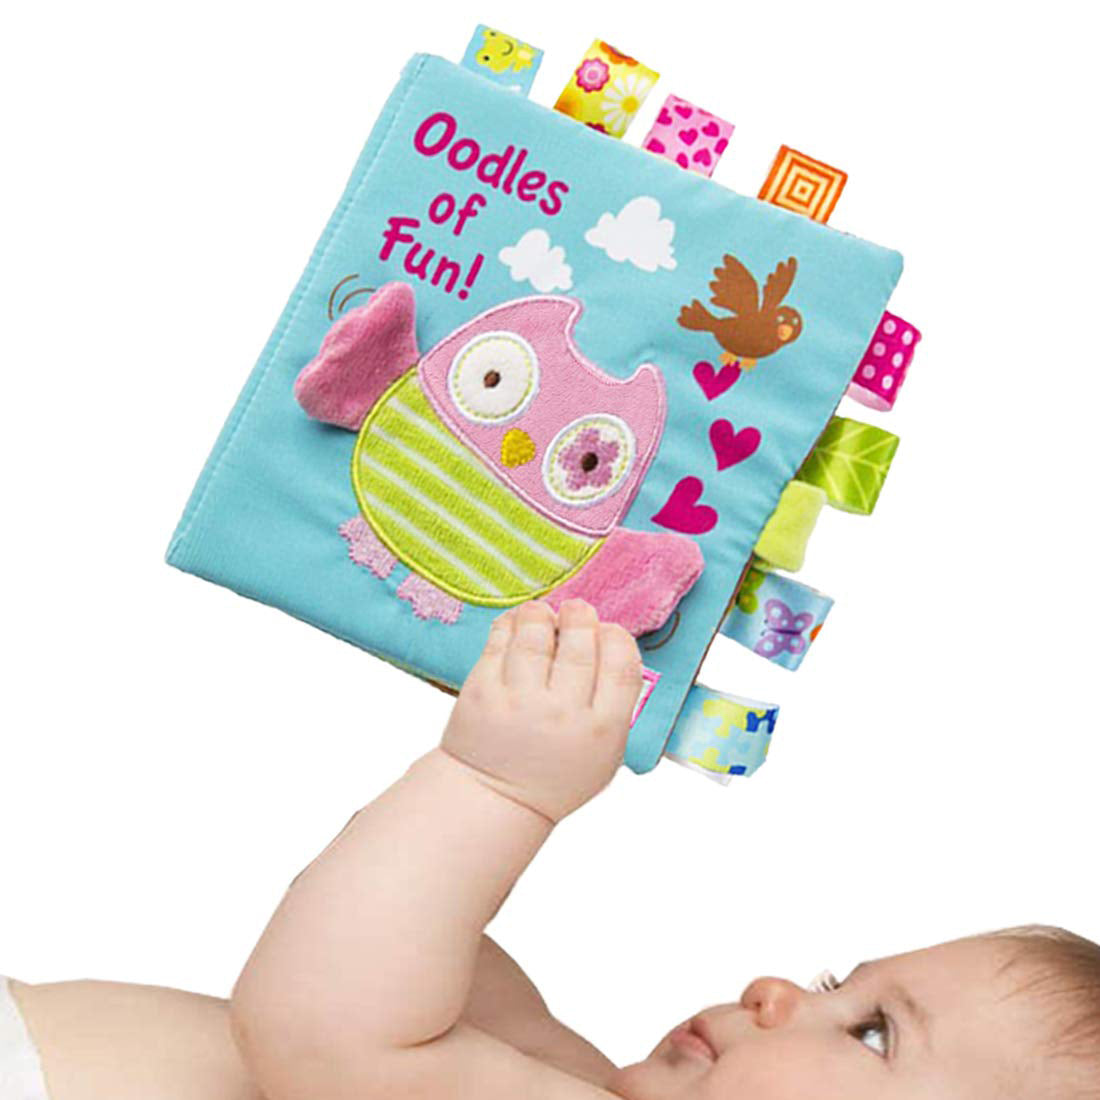 Baby Moo Oodles Owl Educational Learning 3D Cloth Book With Rustle Paper - Multicolour